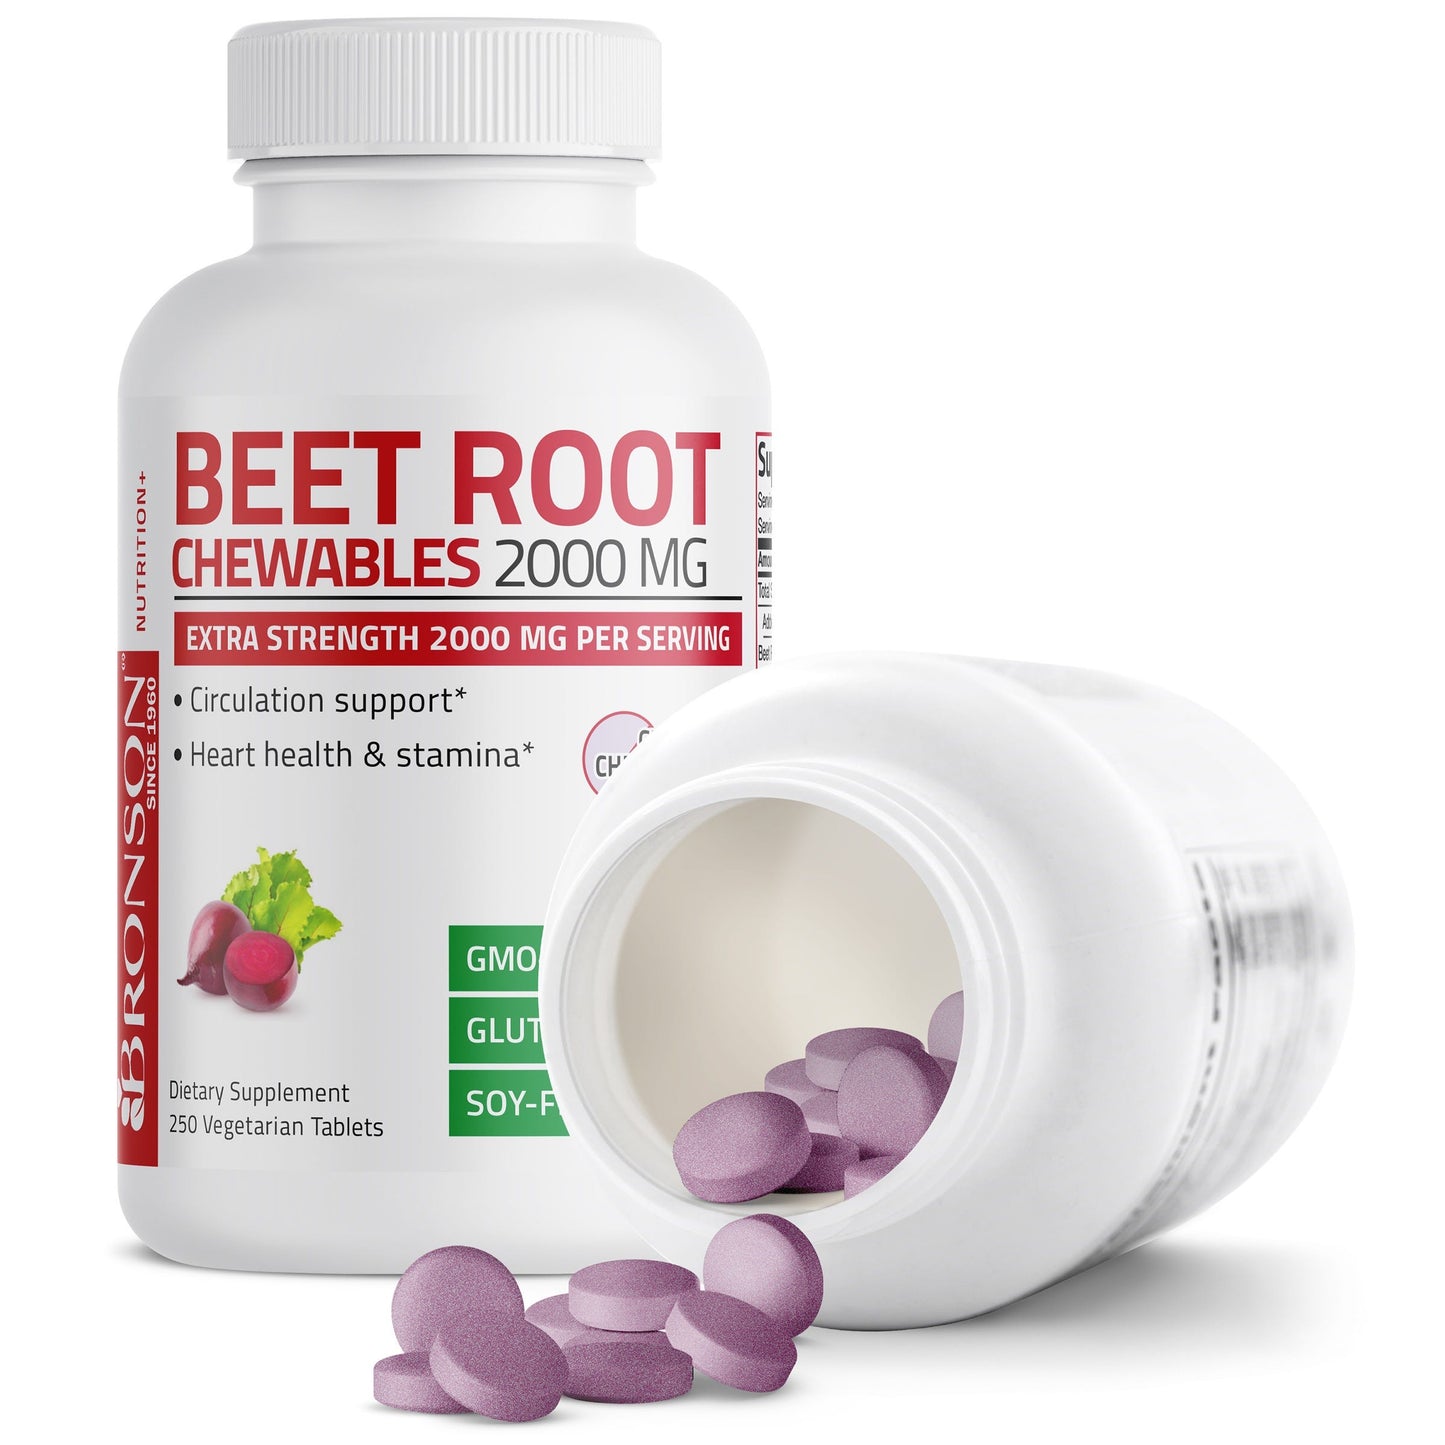 Beet Root Chewables 2000 MG, 250 Grape Flavored Tablets